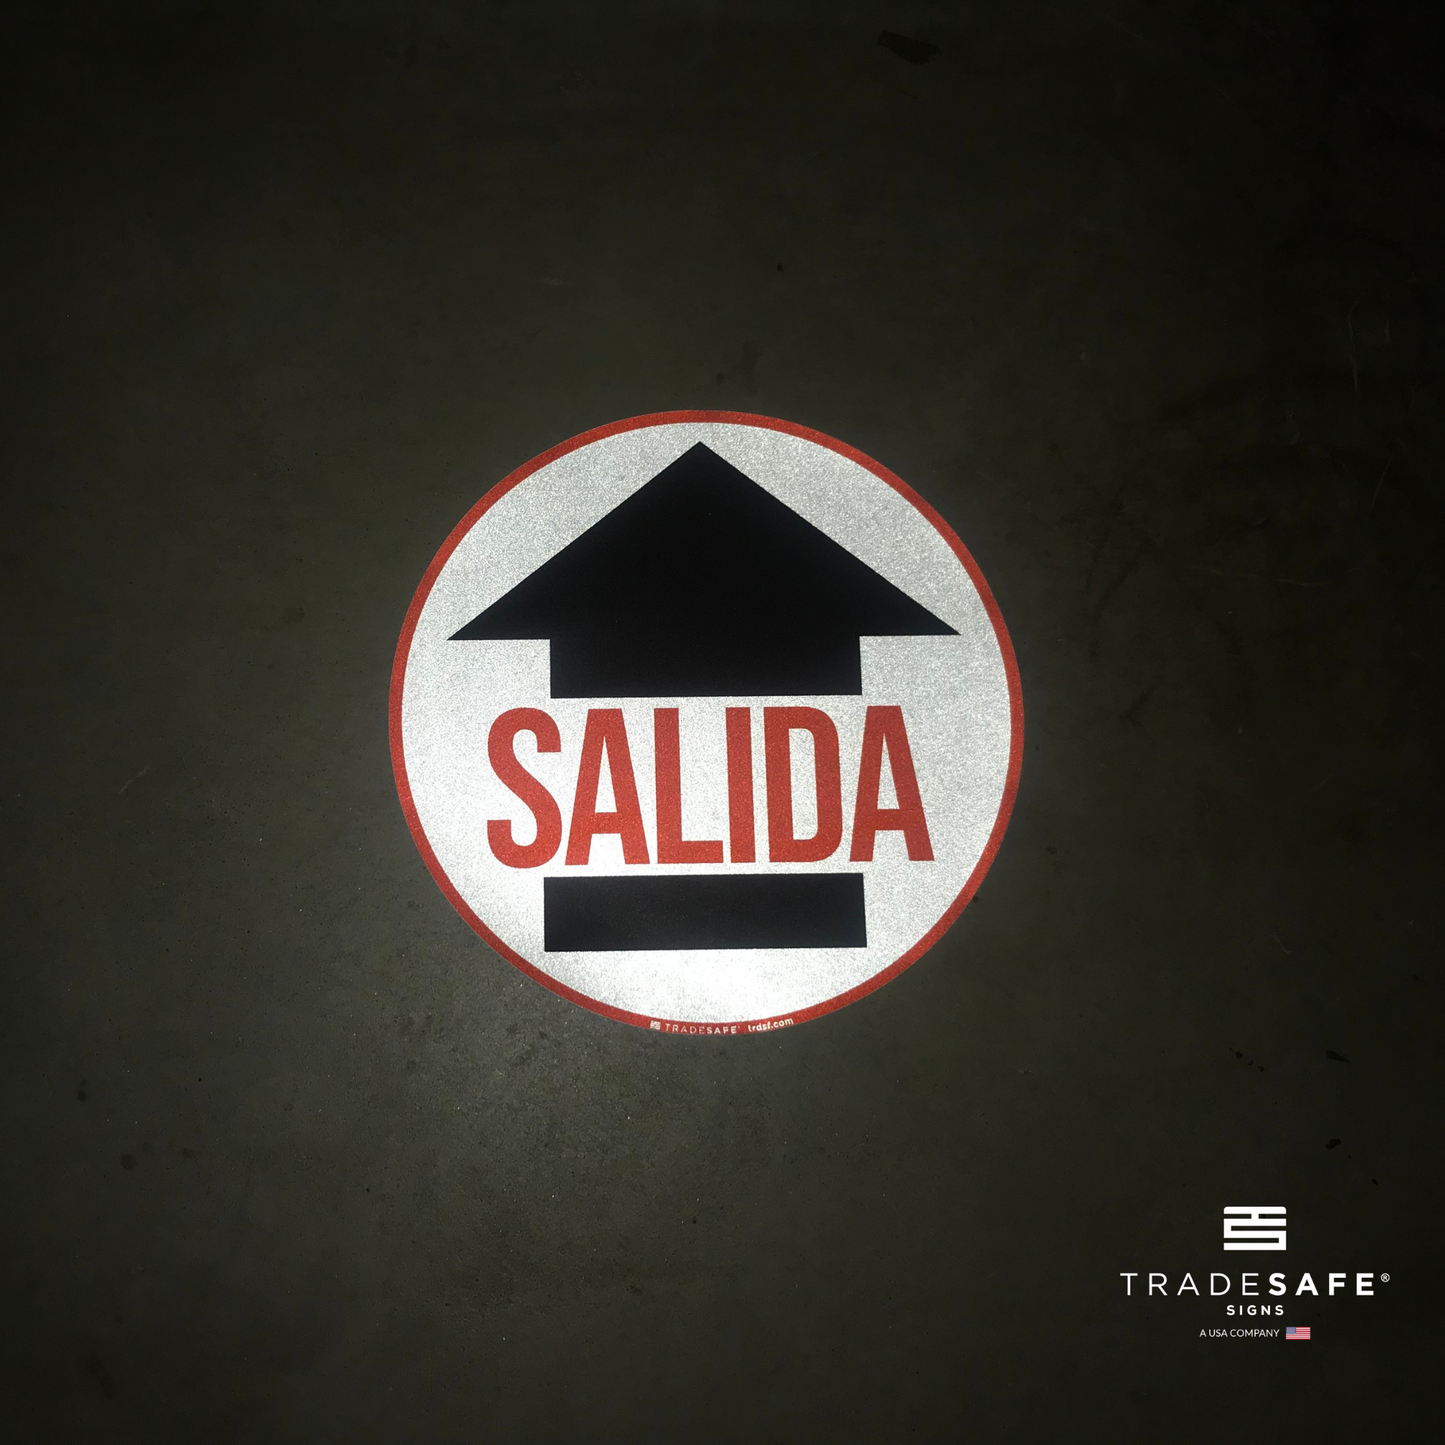 reflective attribute of salida sign on black background